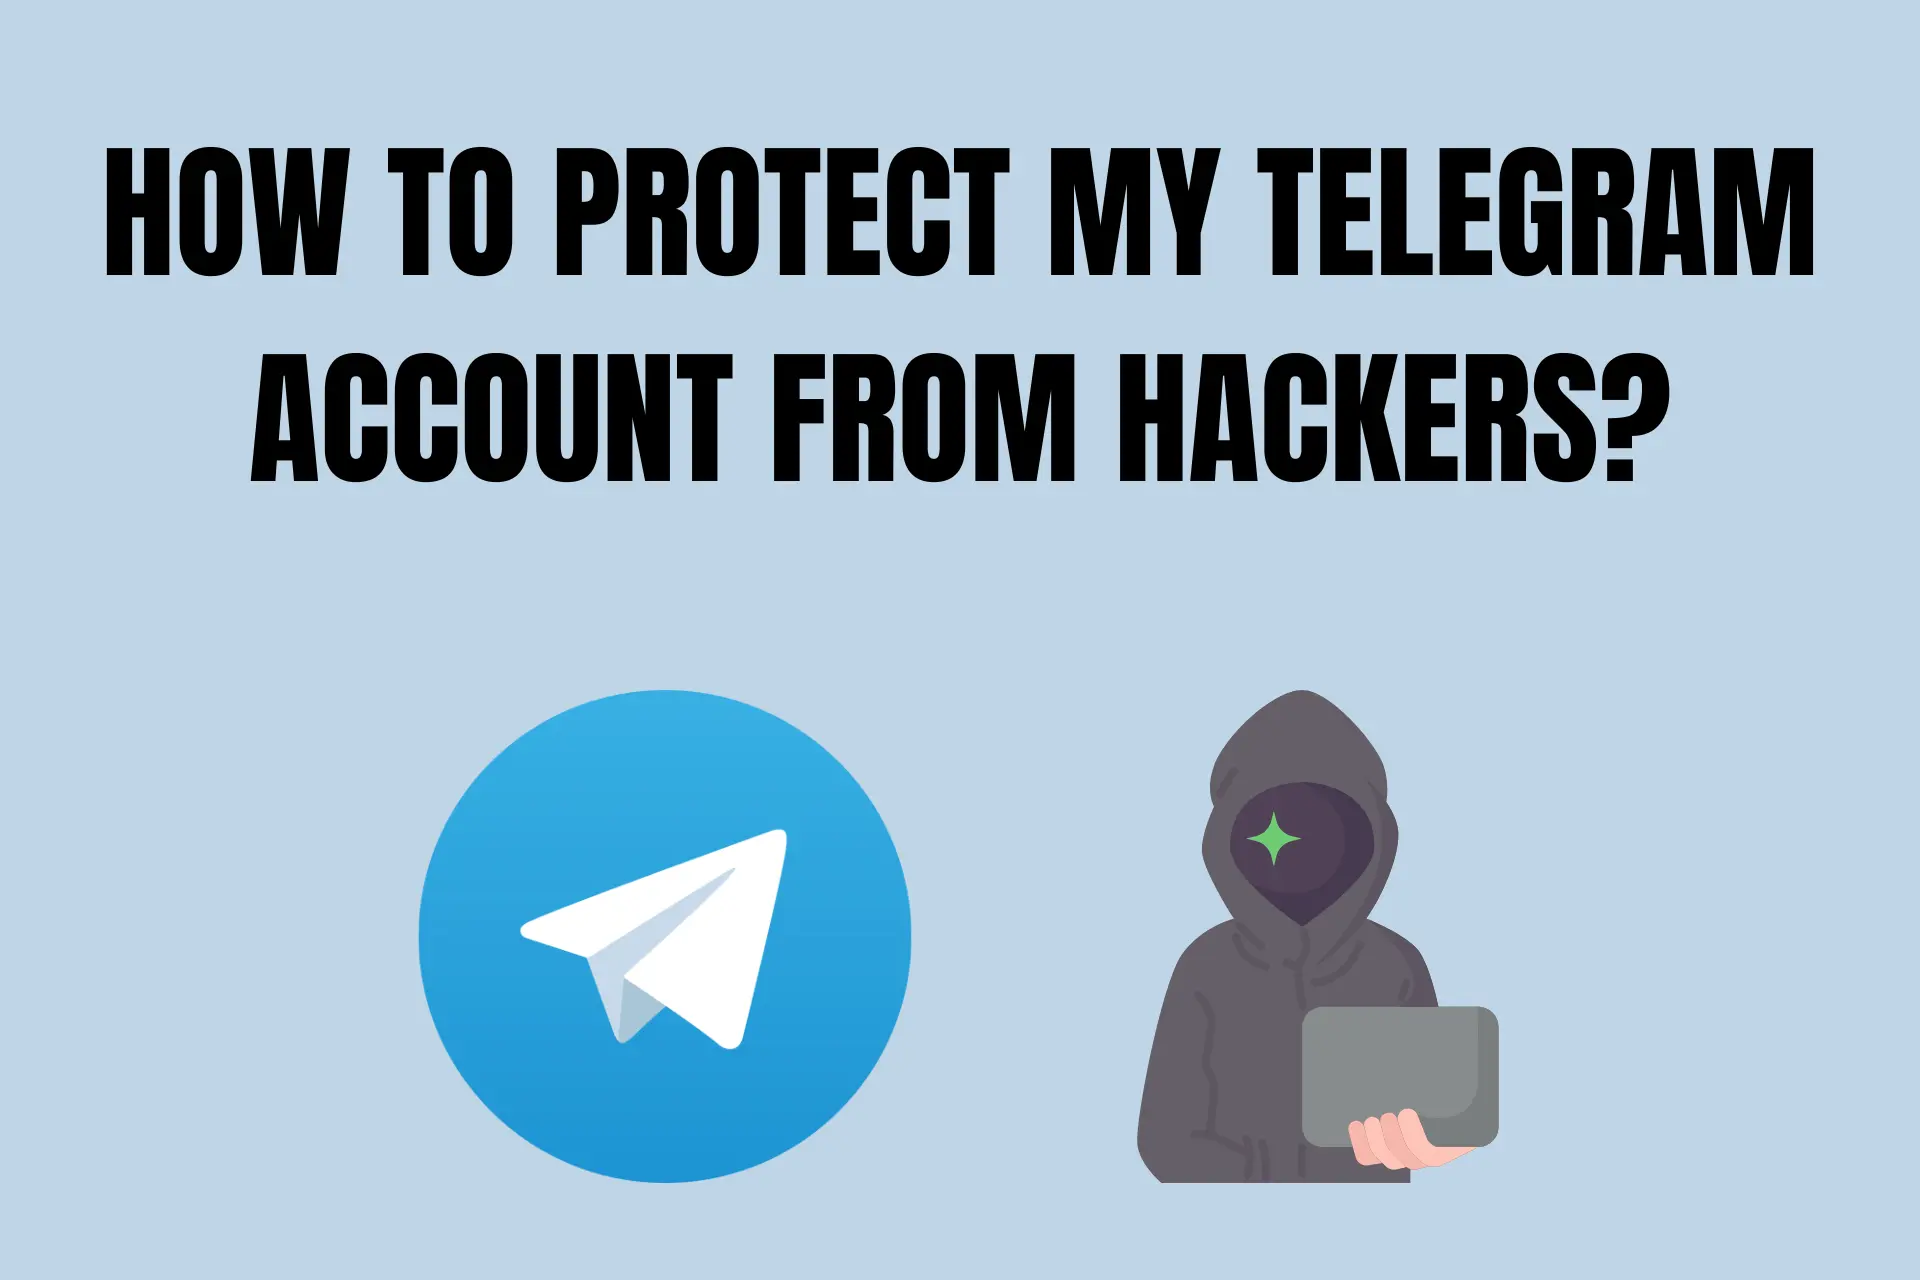 How to protect my telegram account from hackers